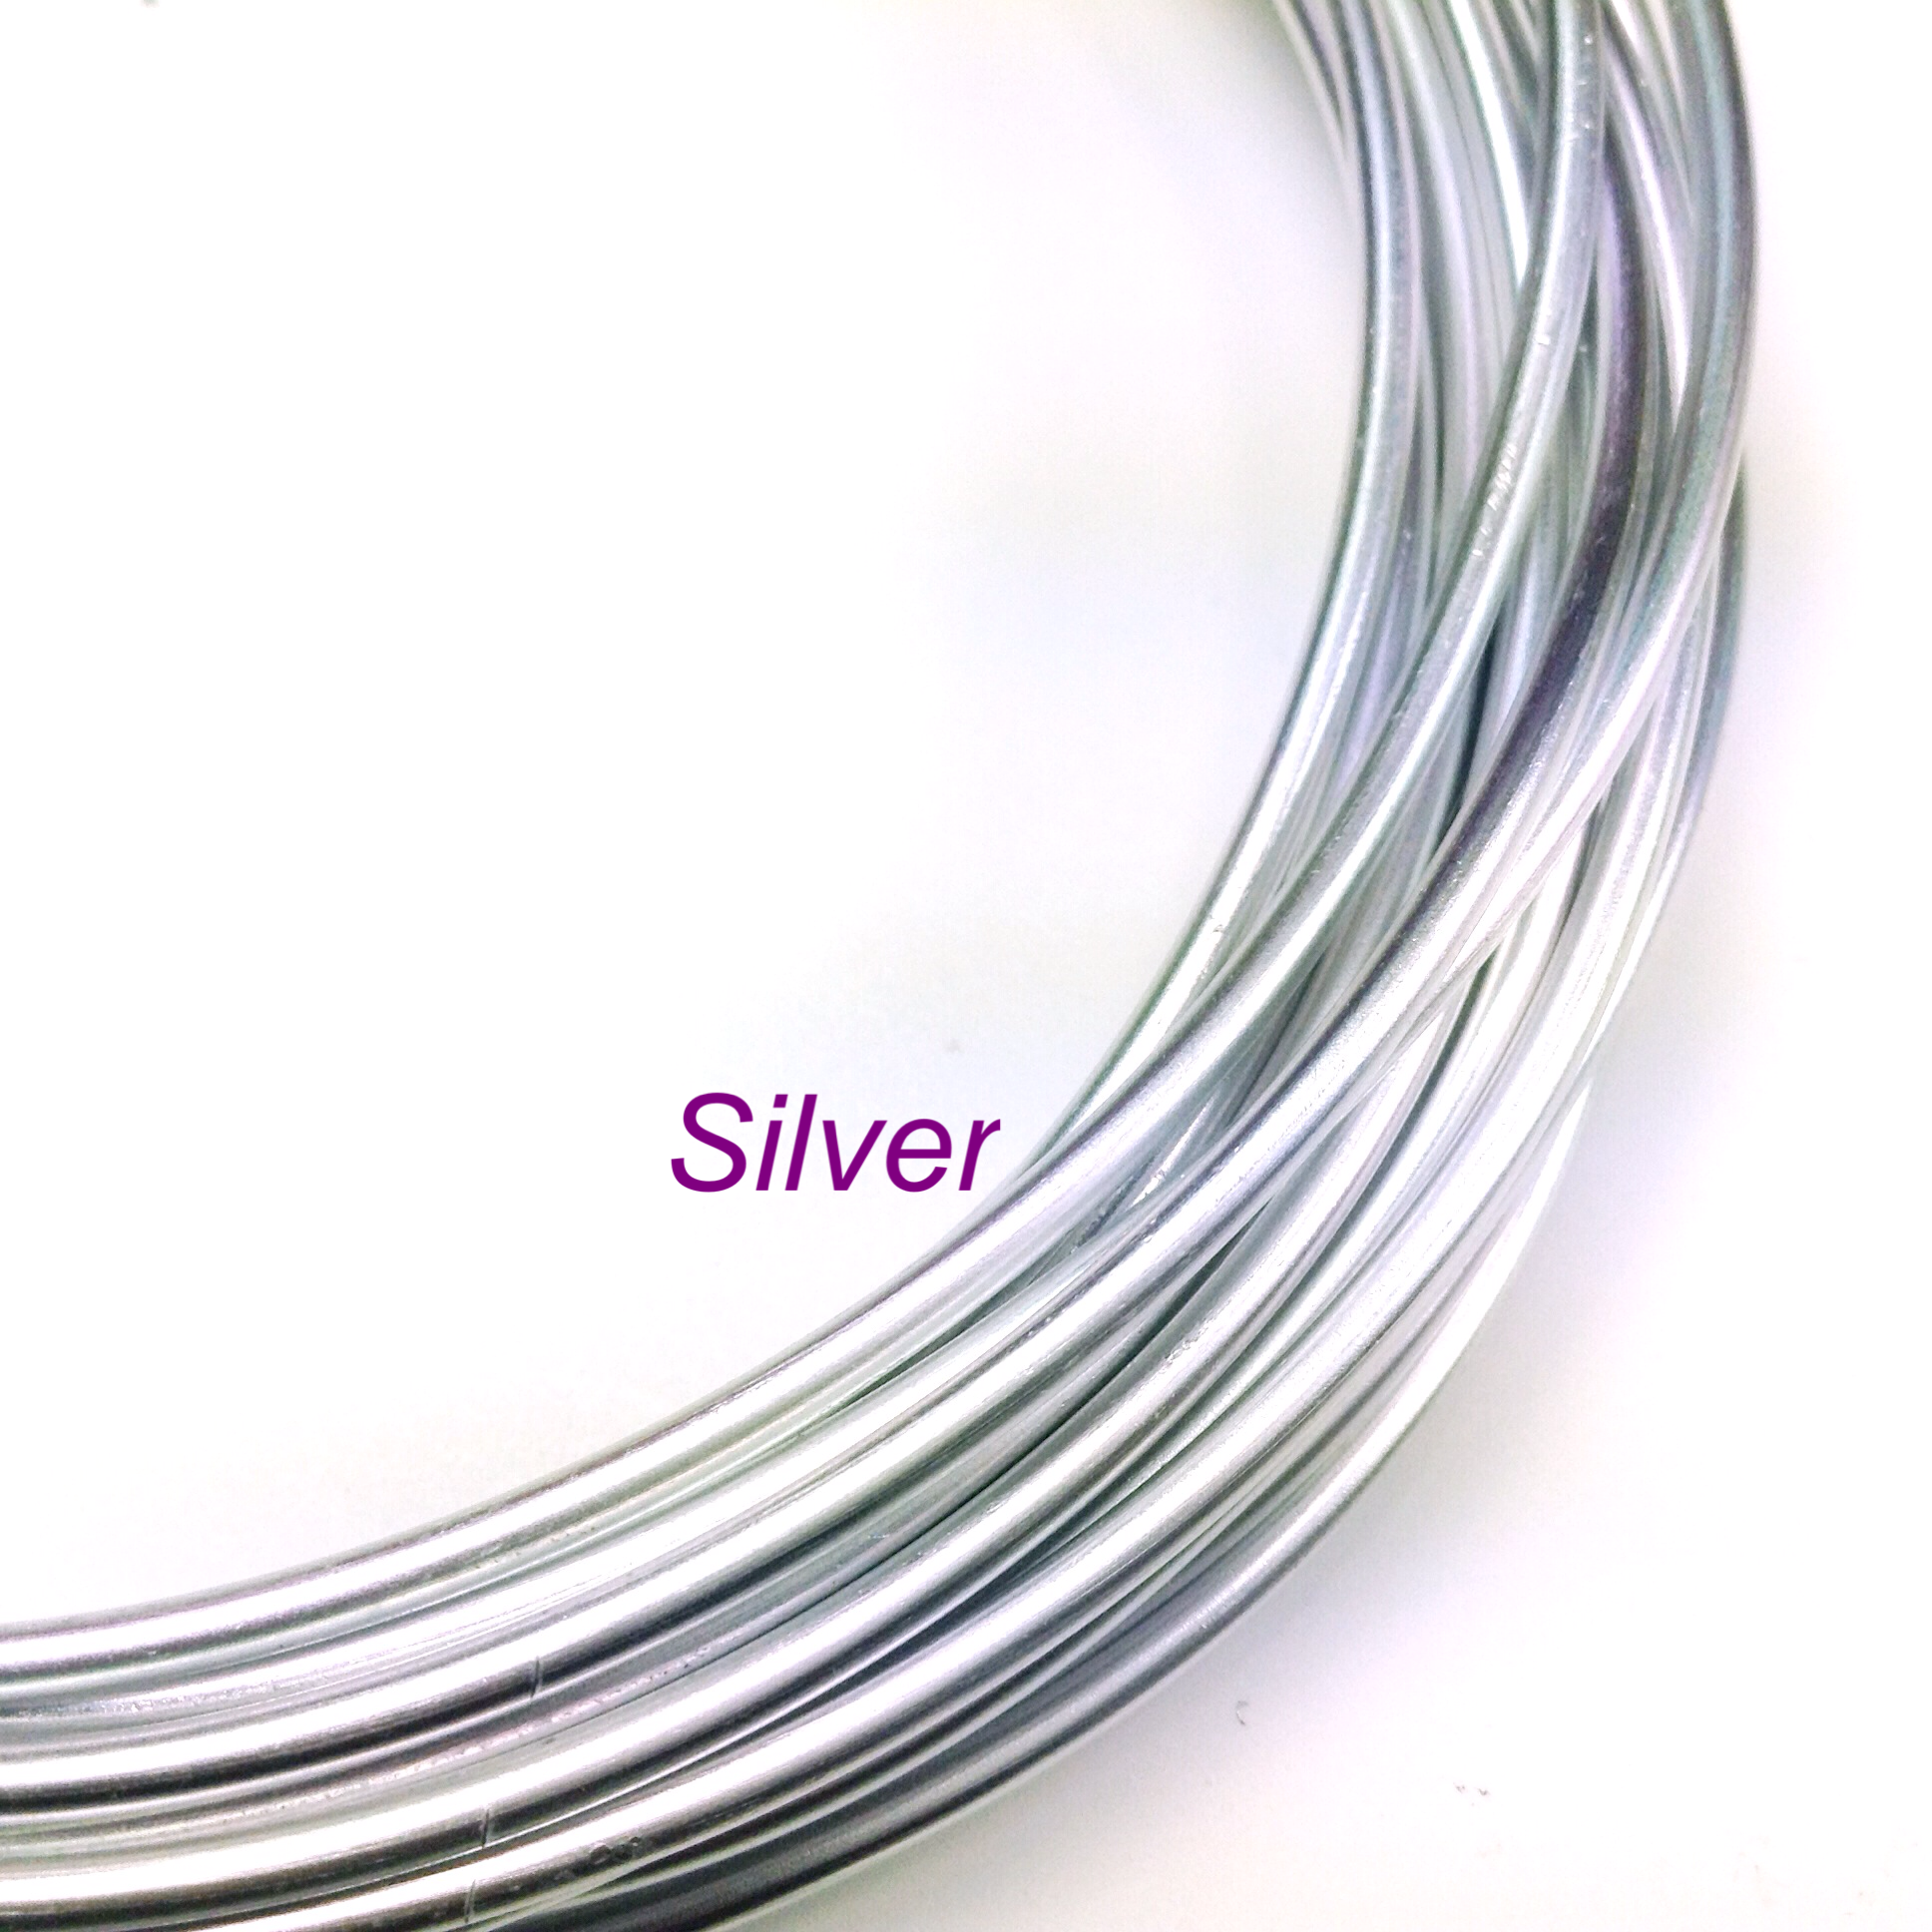 16g Square Anodized Aluminum Wire (0.063''x0.063'') - 30ft roll